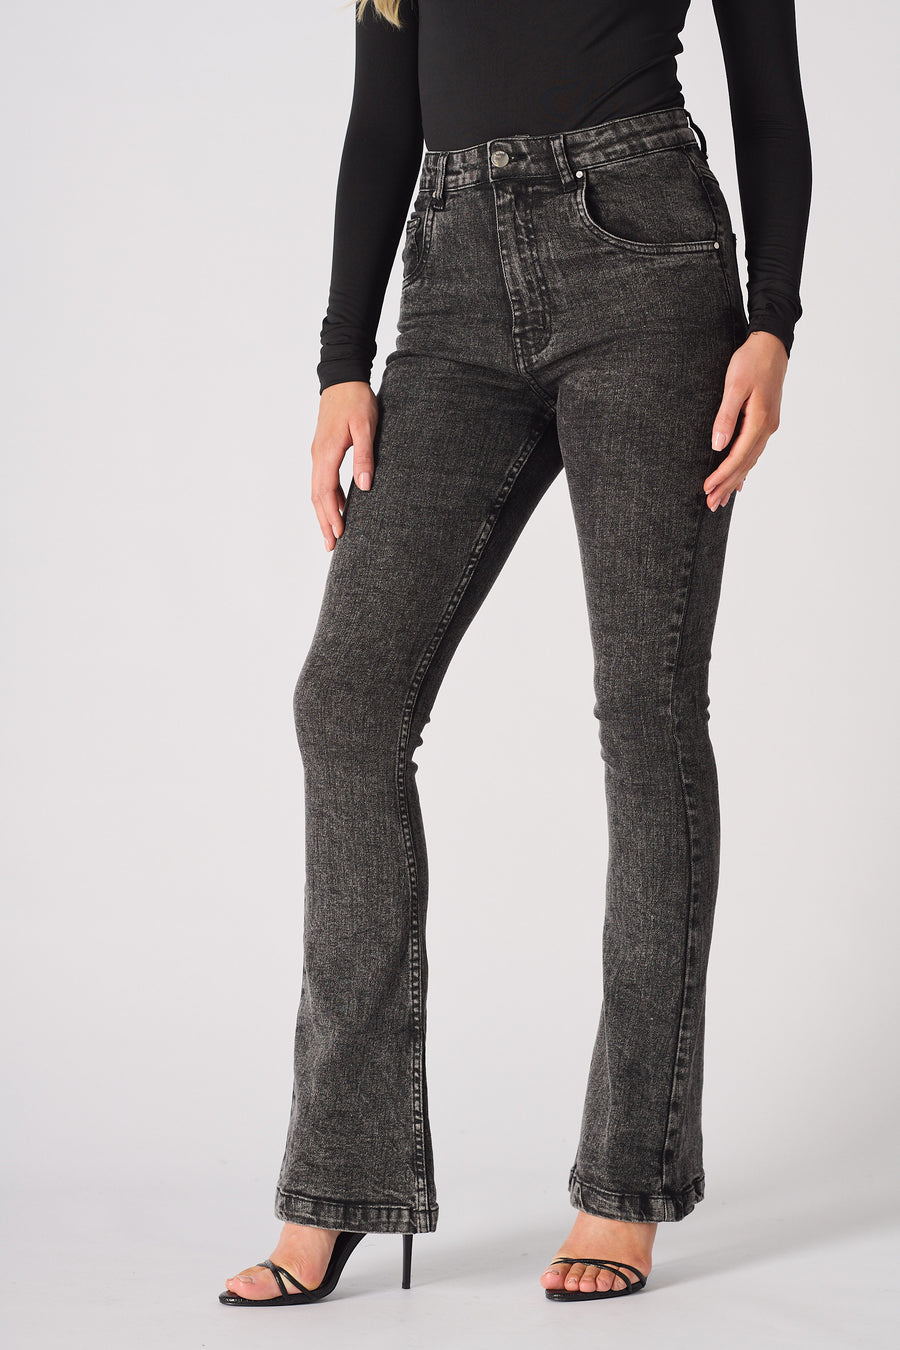 HIGH WAISTED FITTED FLARE JEANS - BLACK